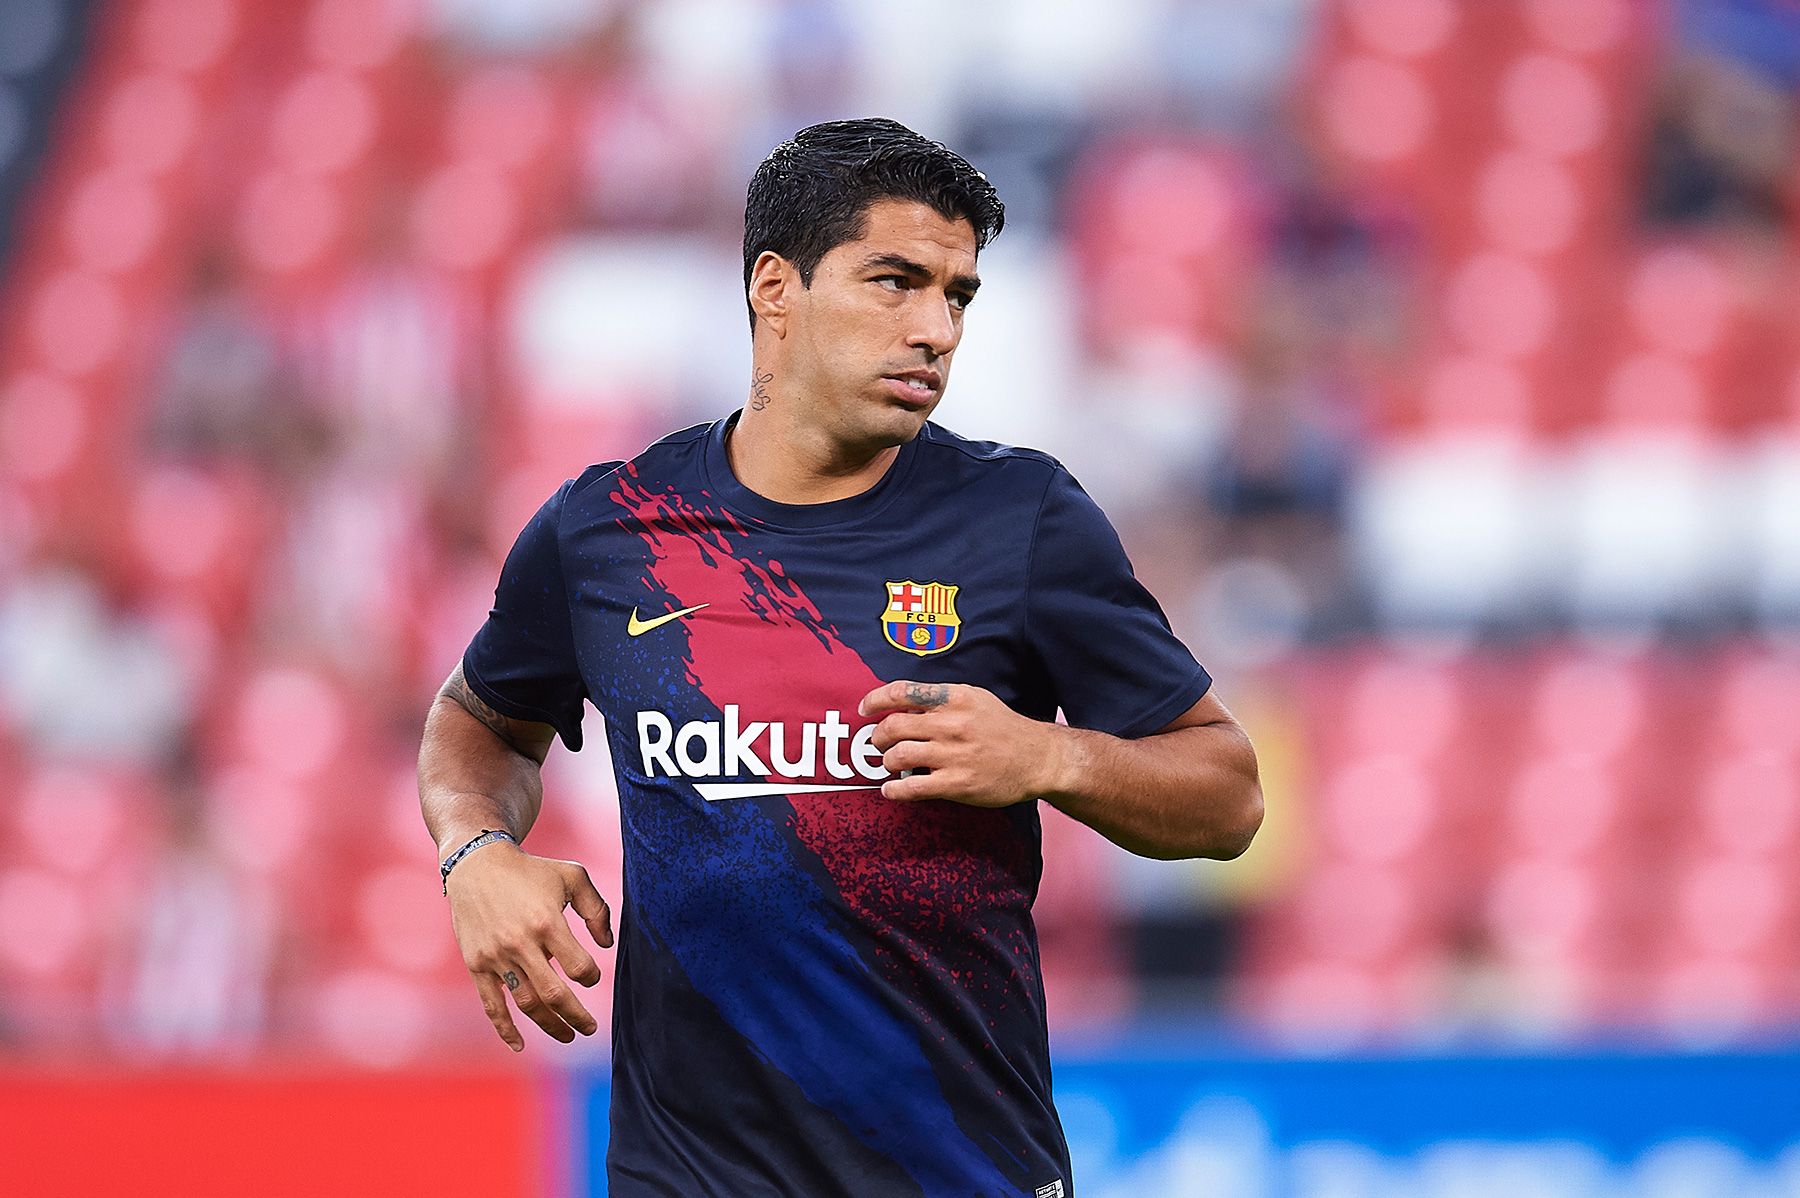 Luis Suarez in the warm up against Athletic